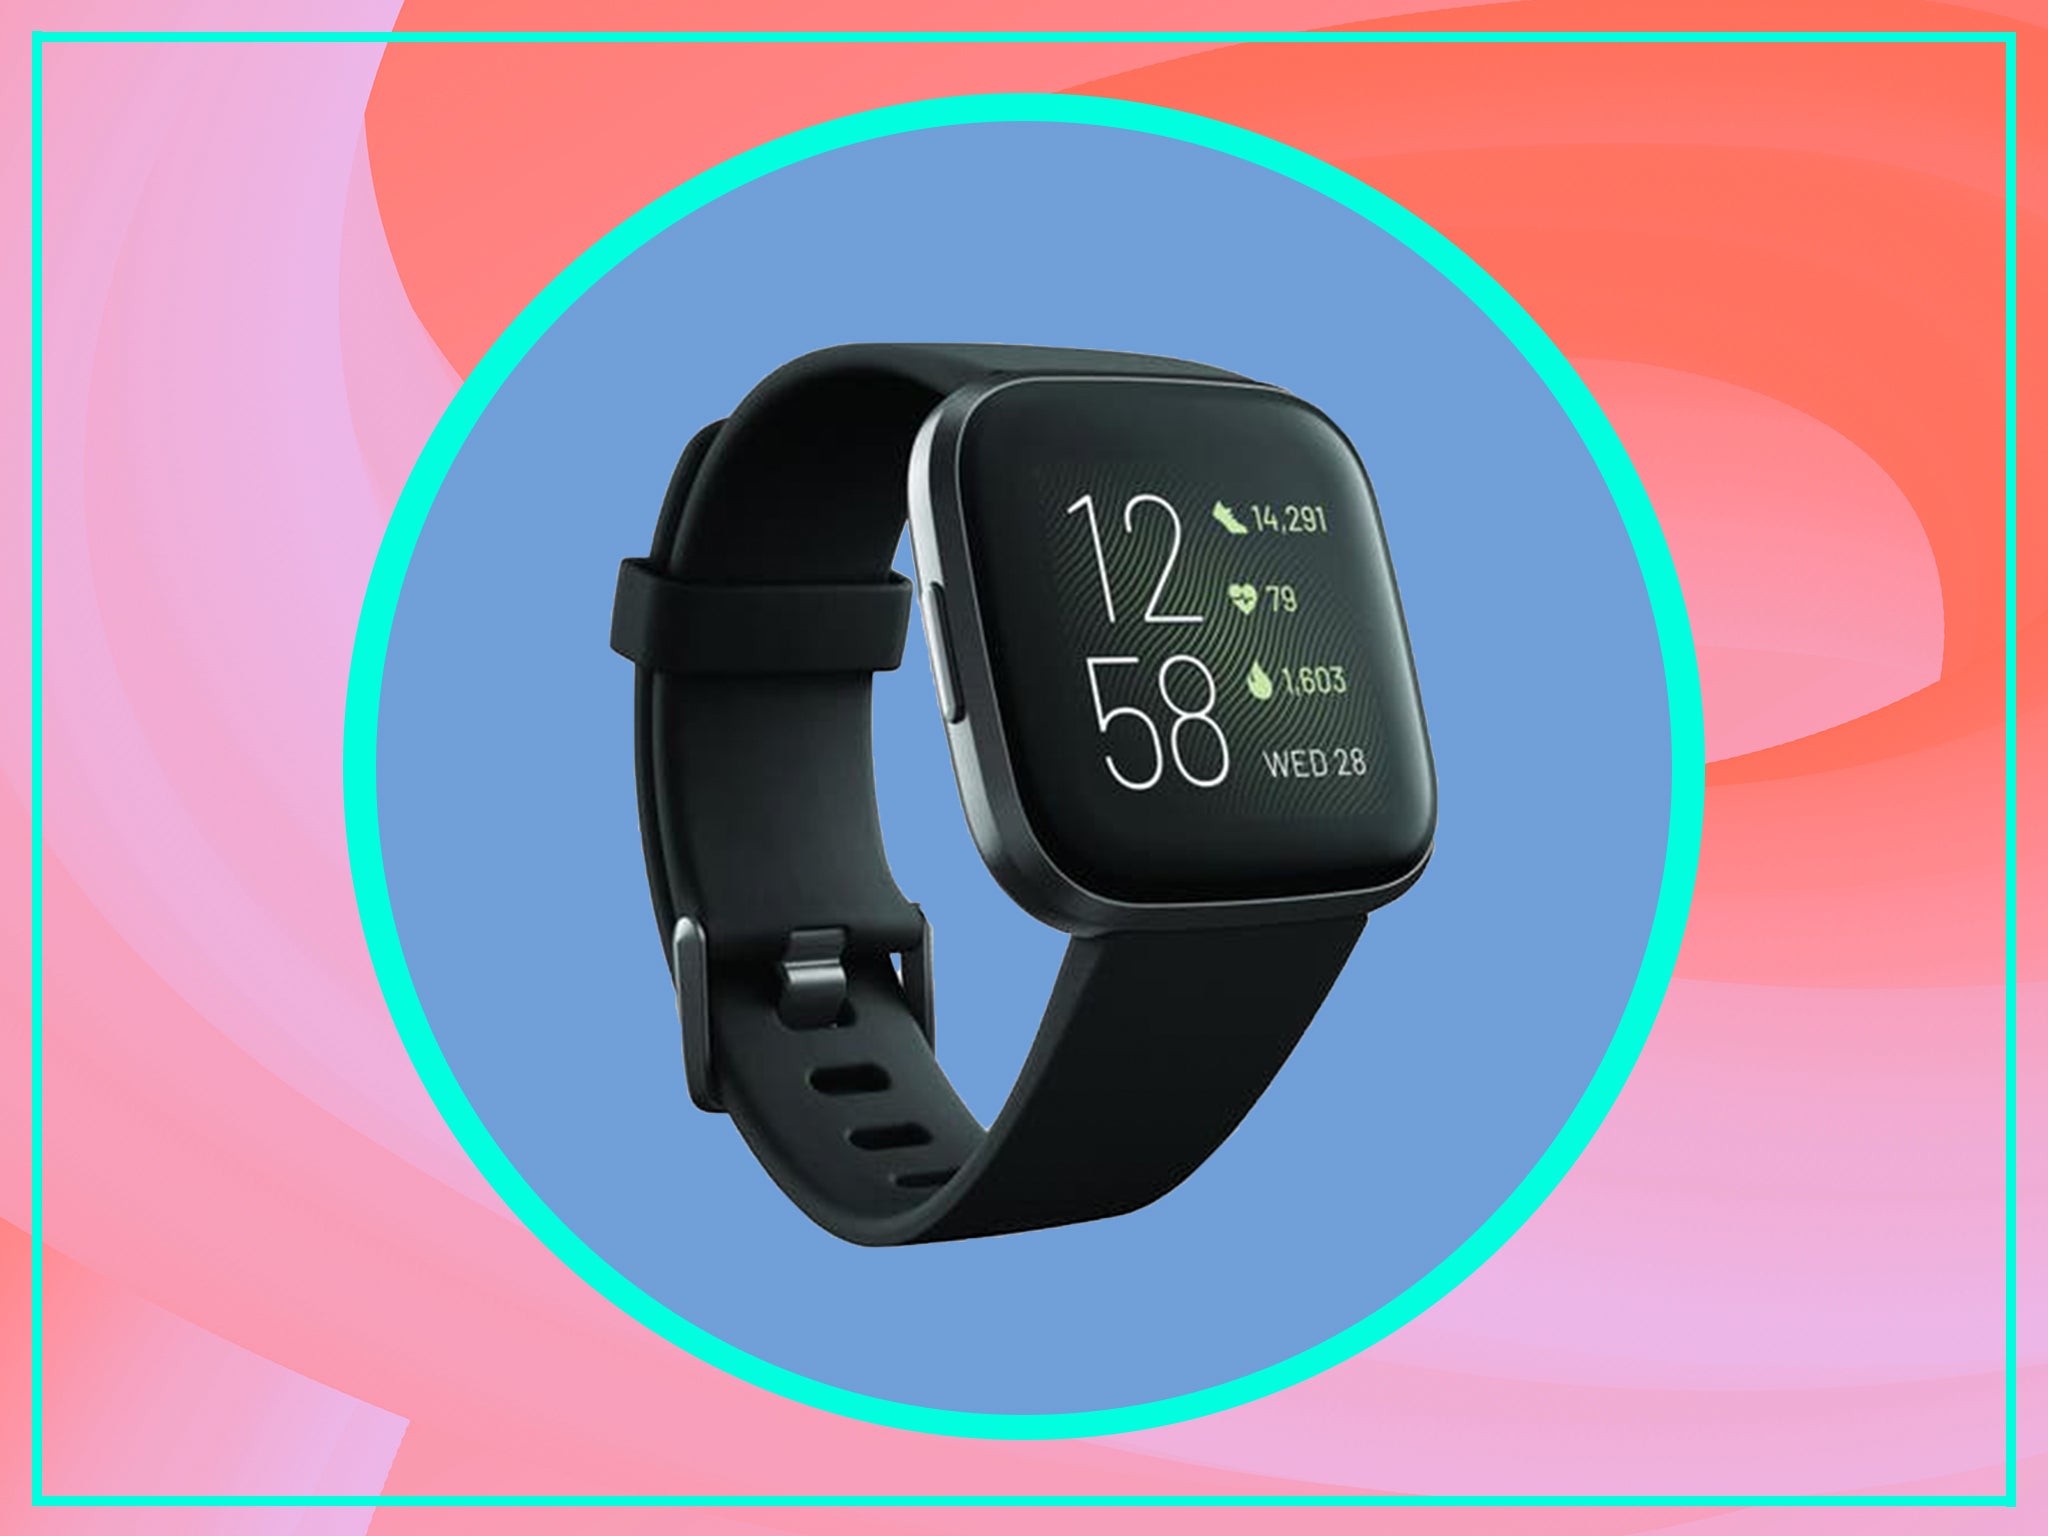 is fitbit a brand